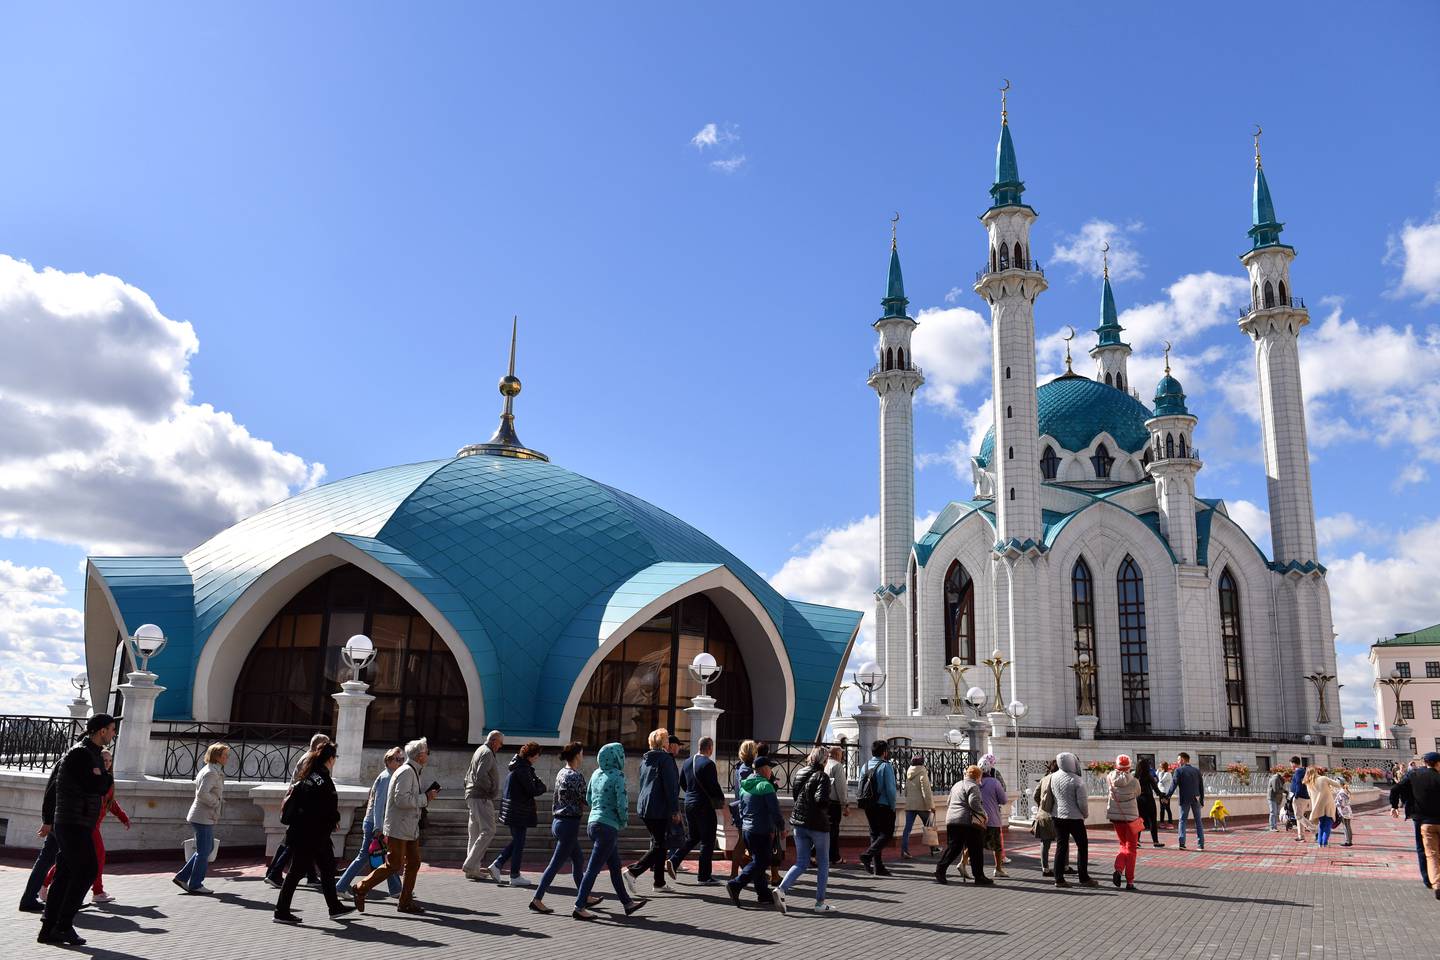 The Kul-Sharif Mosque is a landmark in Kazan, Russia. Getty Images.